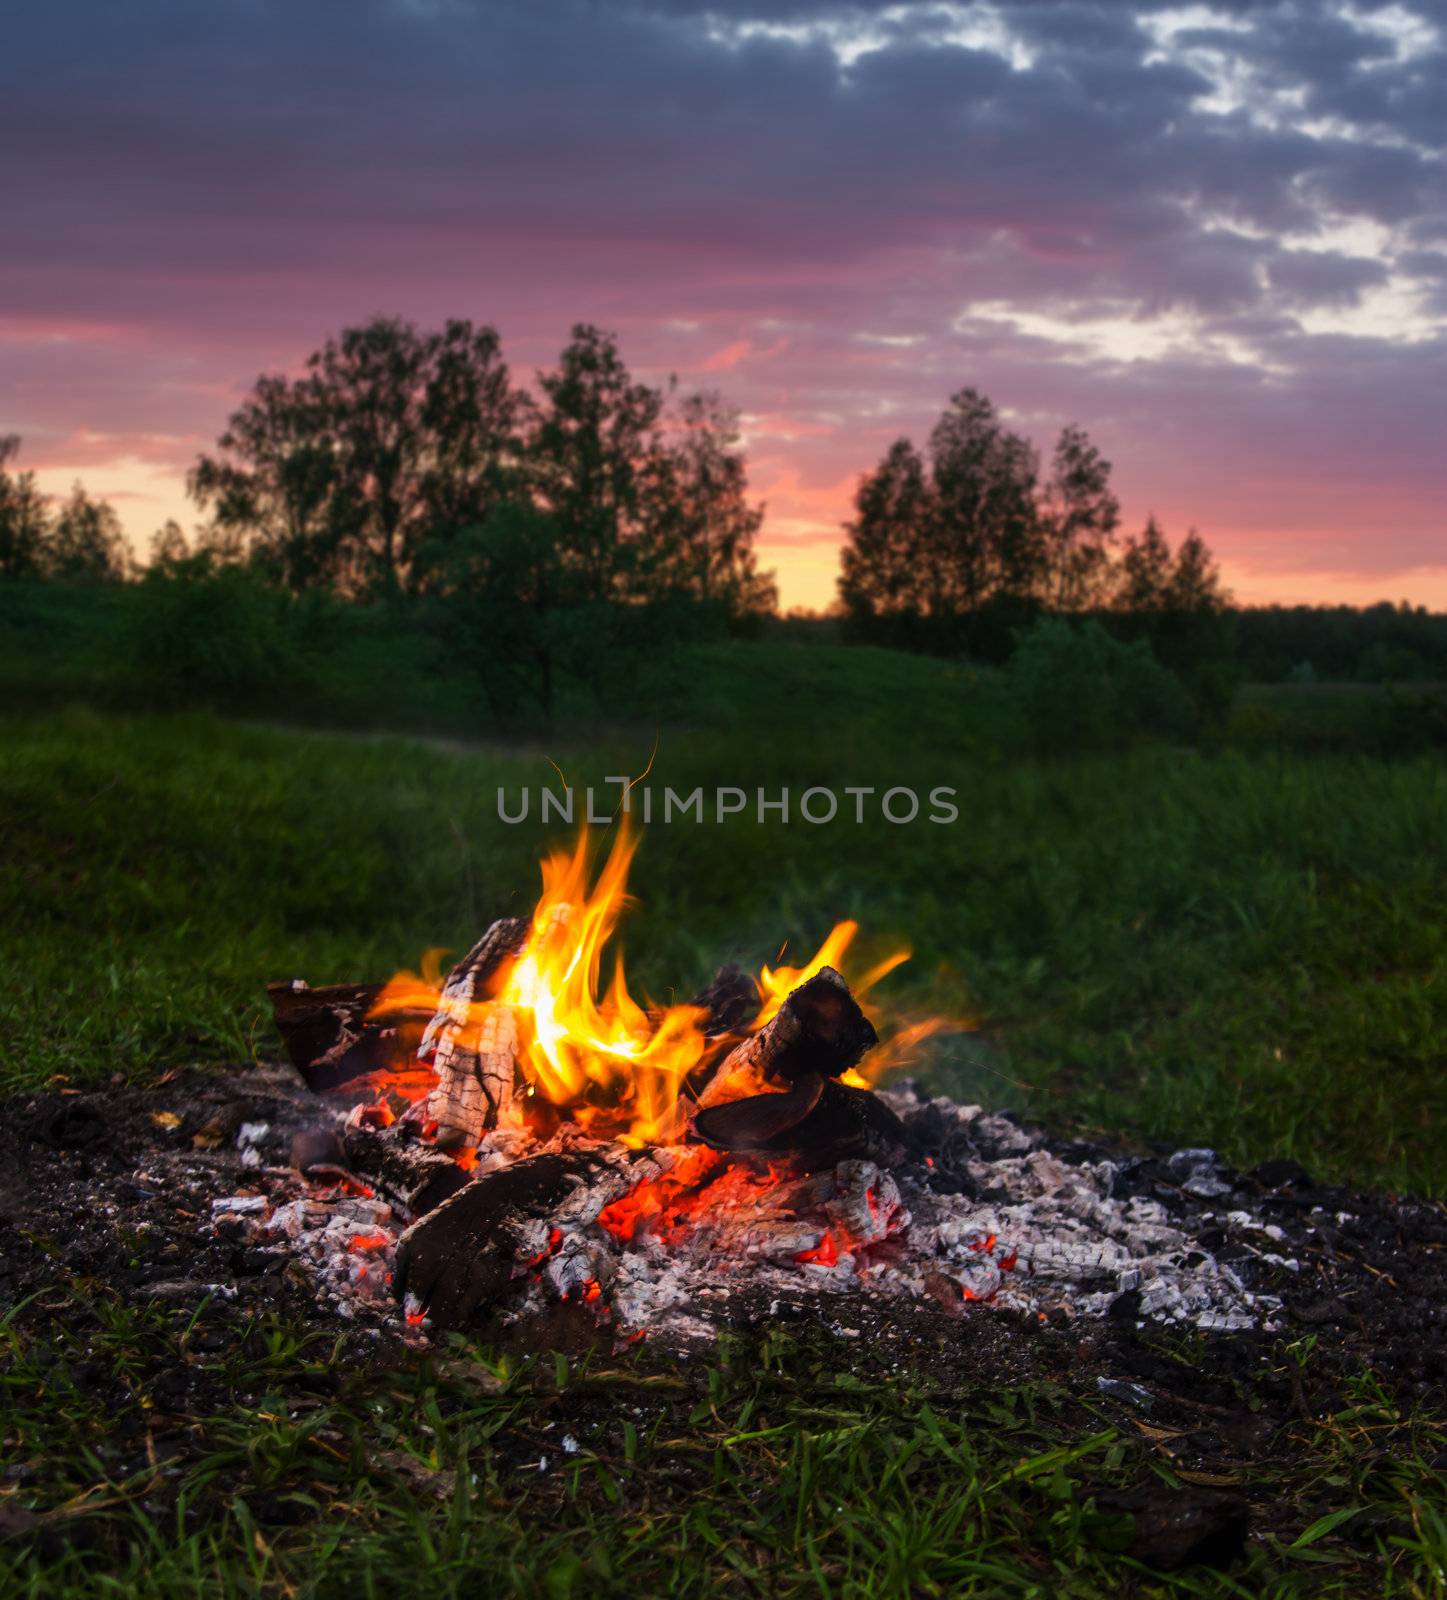 Fireplace in forest at dusk by oleg_zhukov